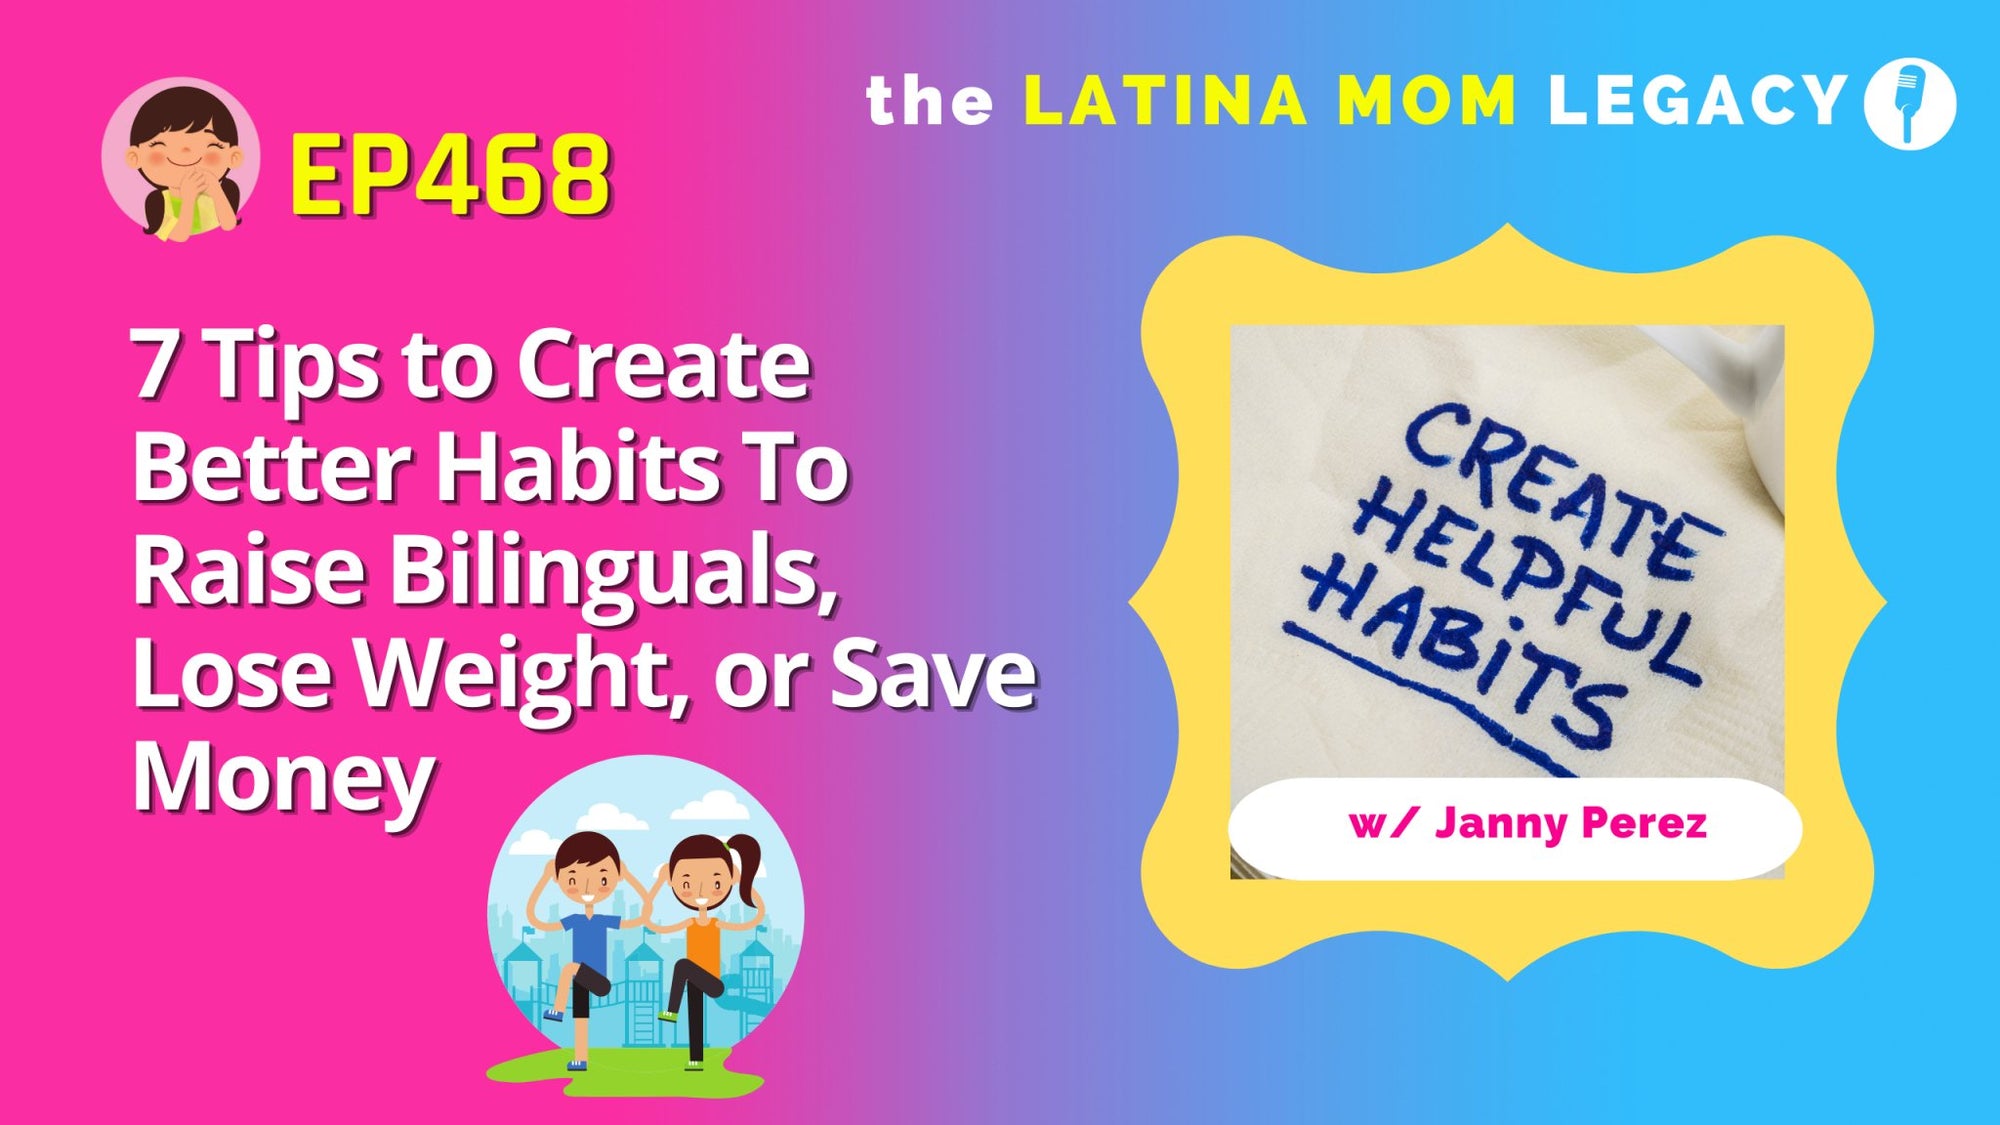 468 - 7 Tips to Create Better Habits To Raise Bilinguals, Lose Weight, or Save Money - Mi LegaSi